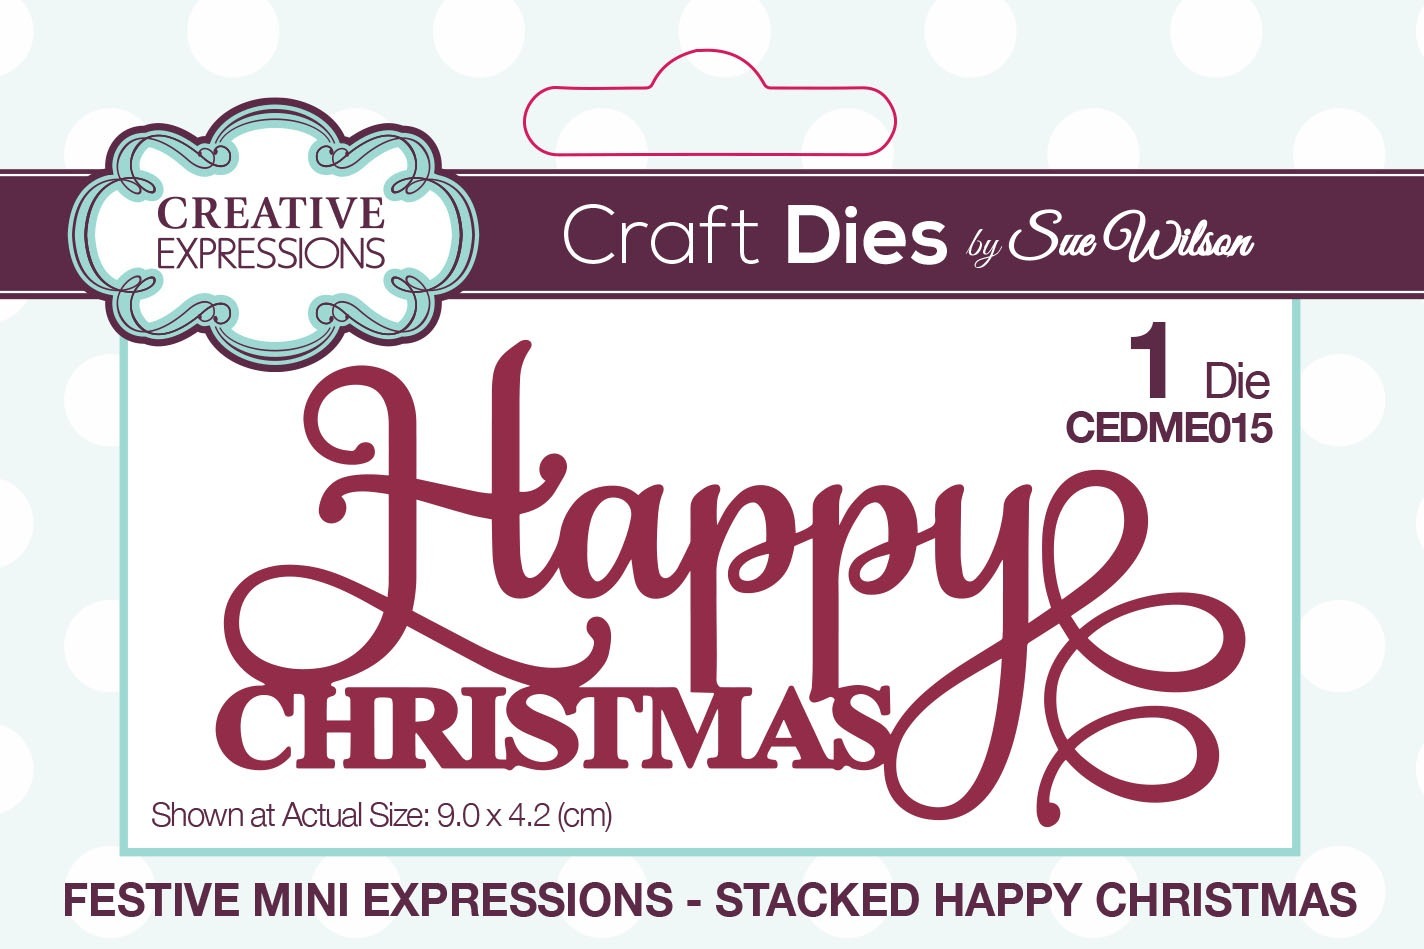 Sue Wilson Dies Festive Mini Expressions Stacked Happy Christmas CEDME015